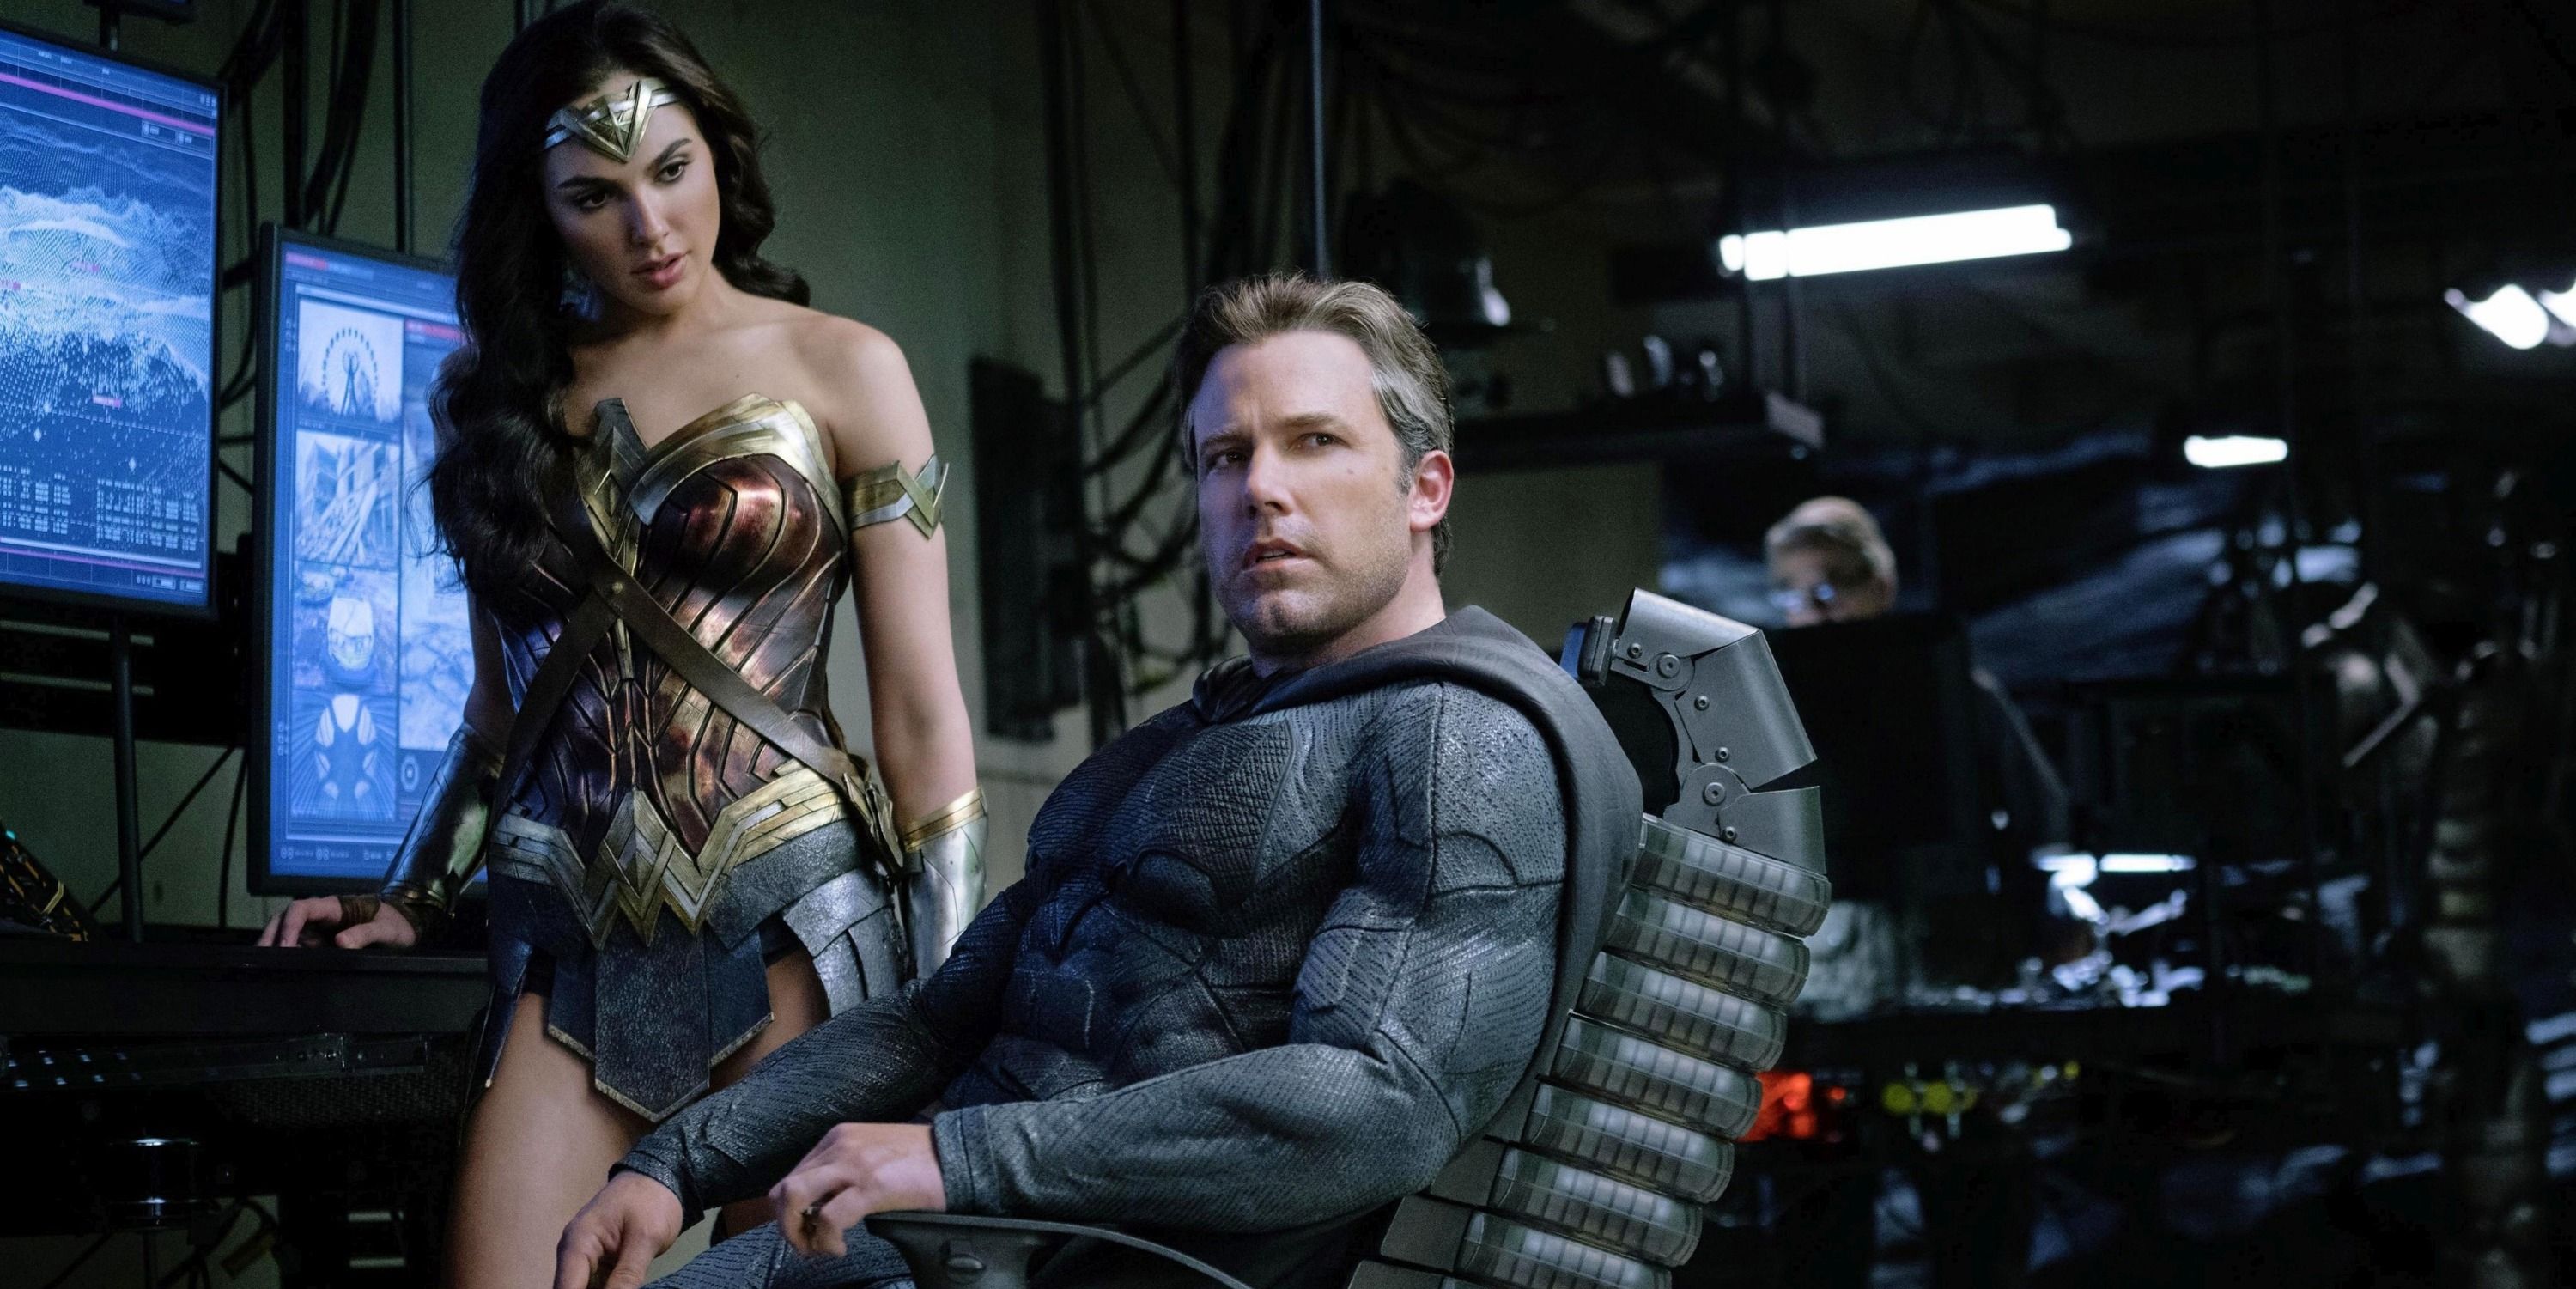 An image of Wonder Woman talking to Batman, who is sitting in a chair in Justice League